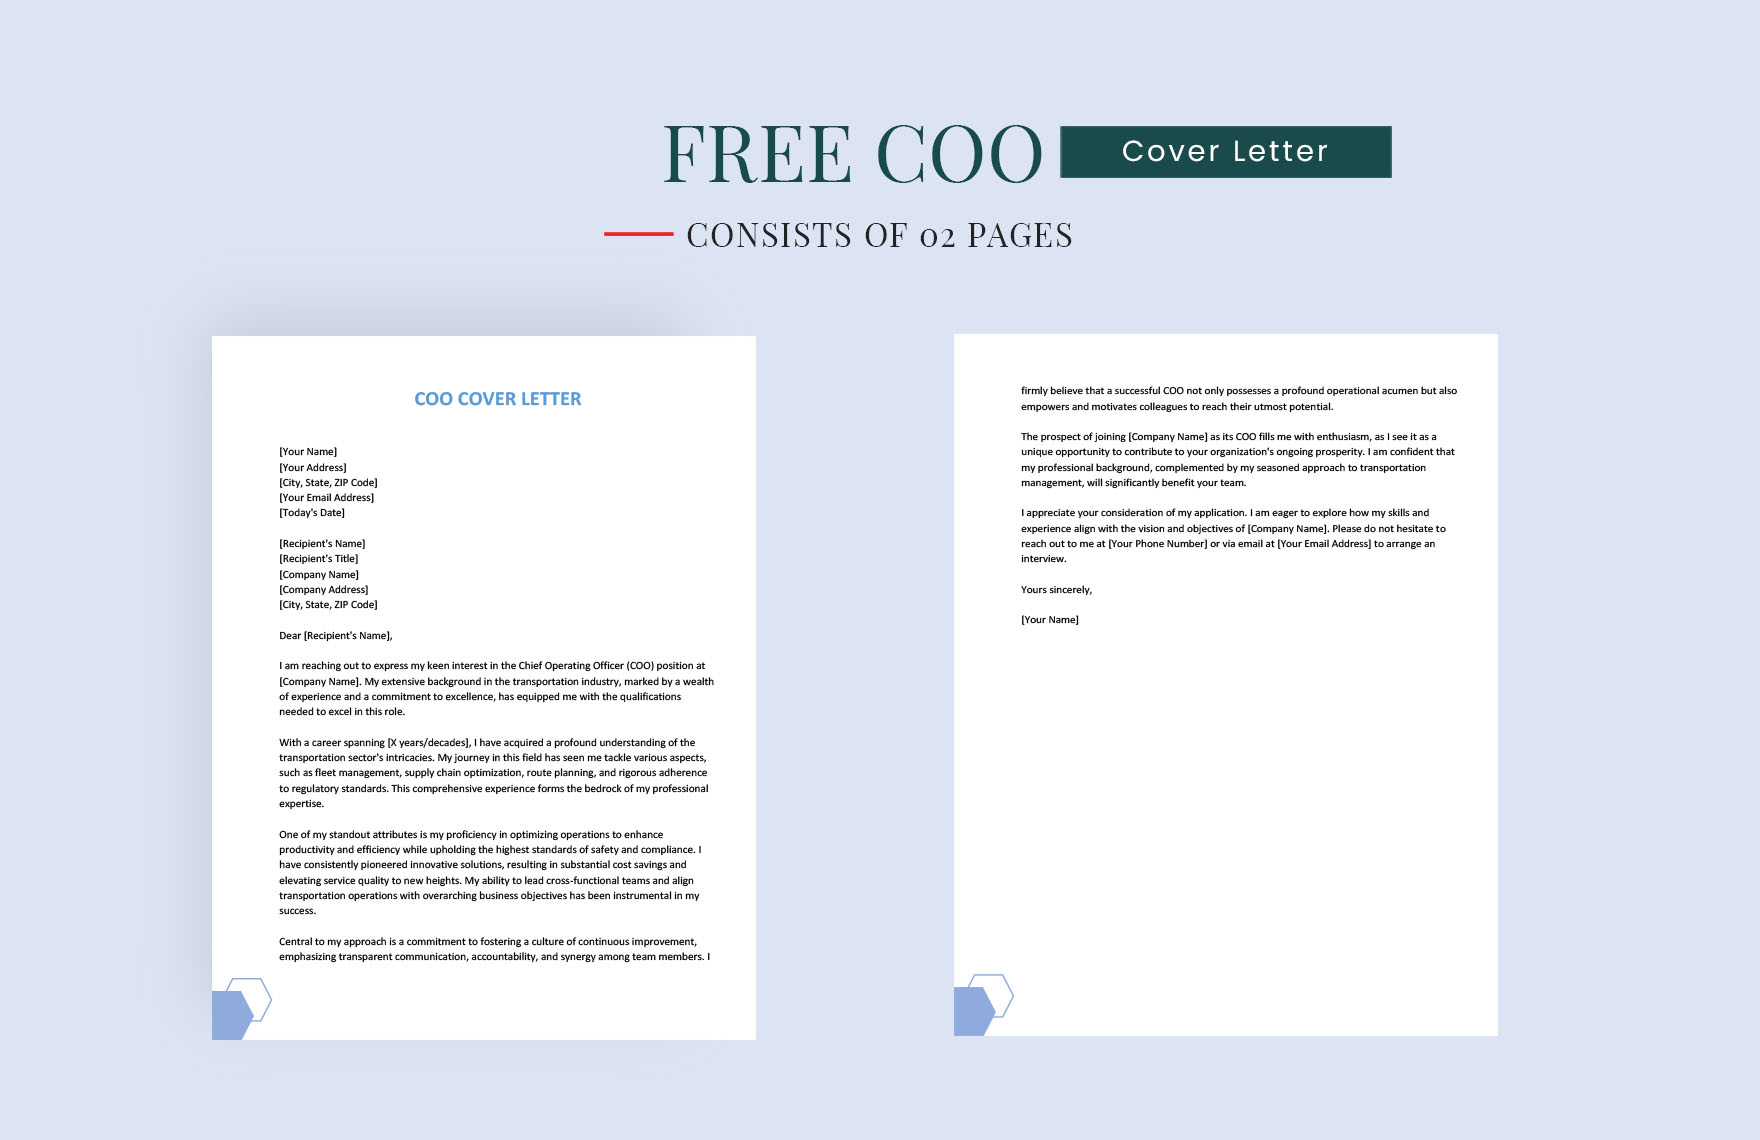 COO Cover Letter in Word, Google Docs